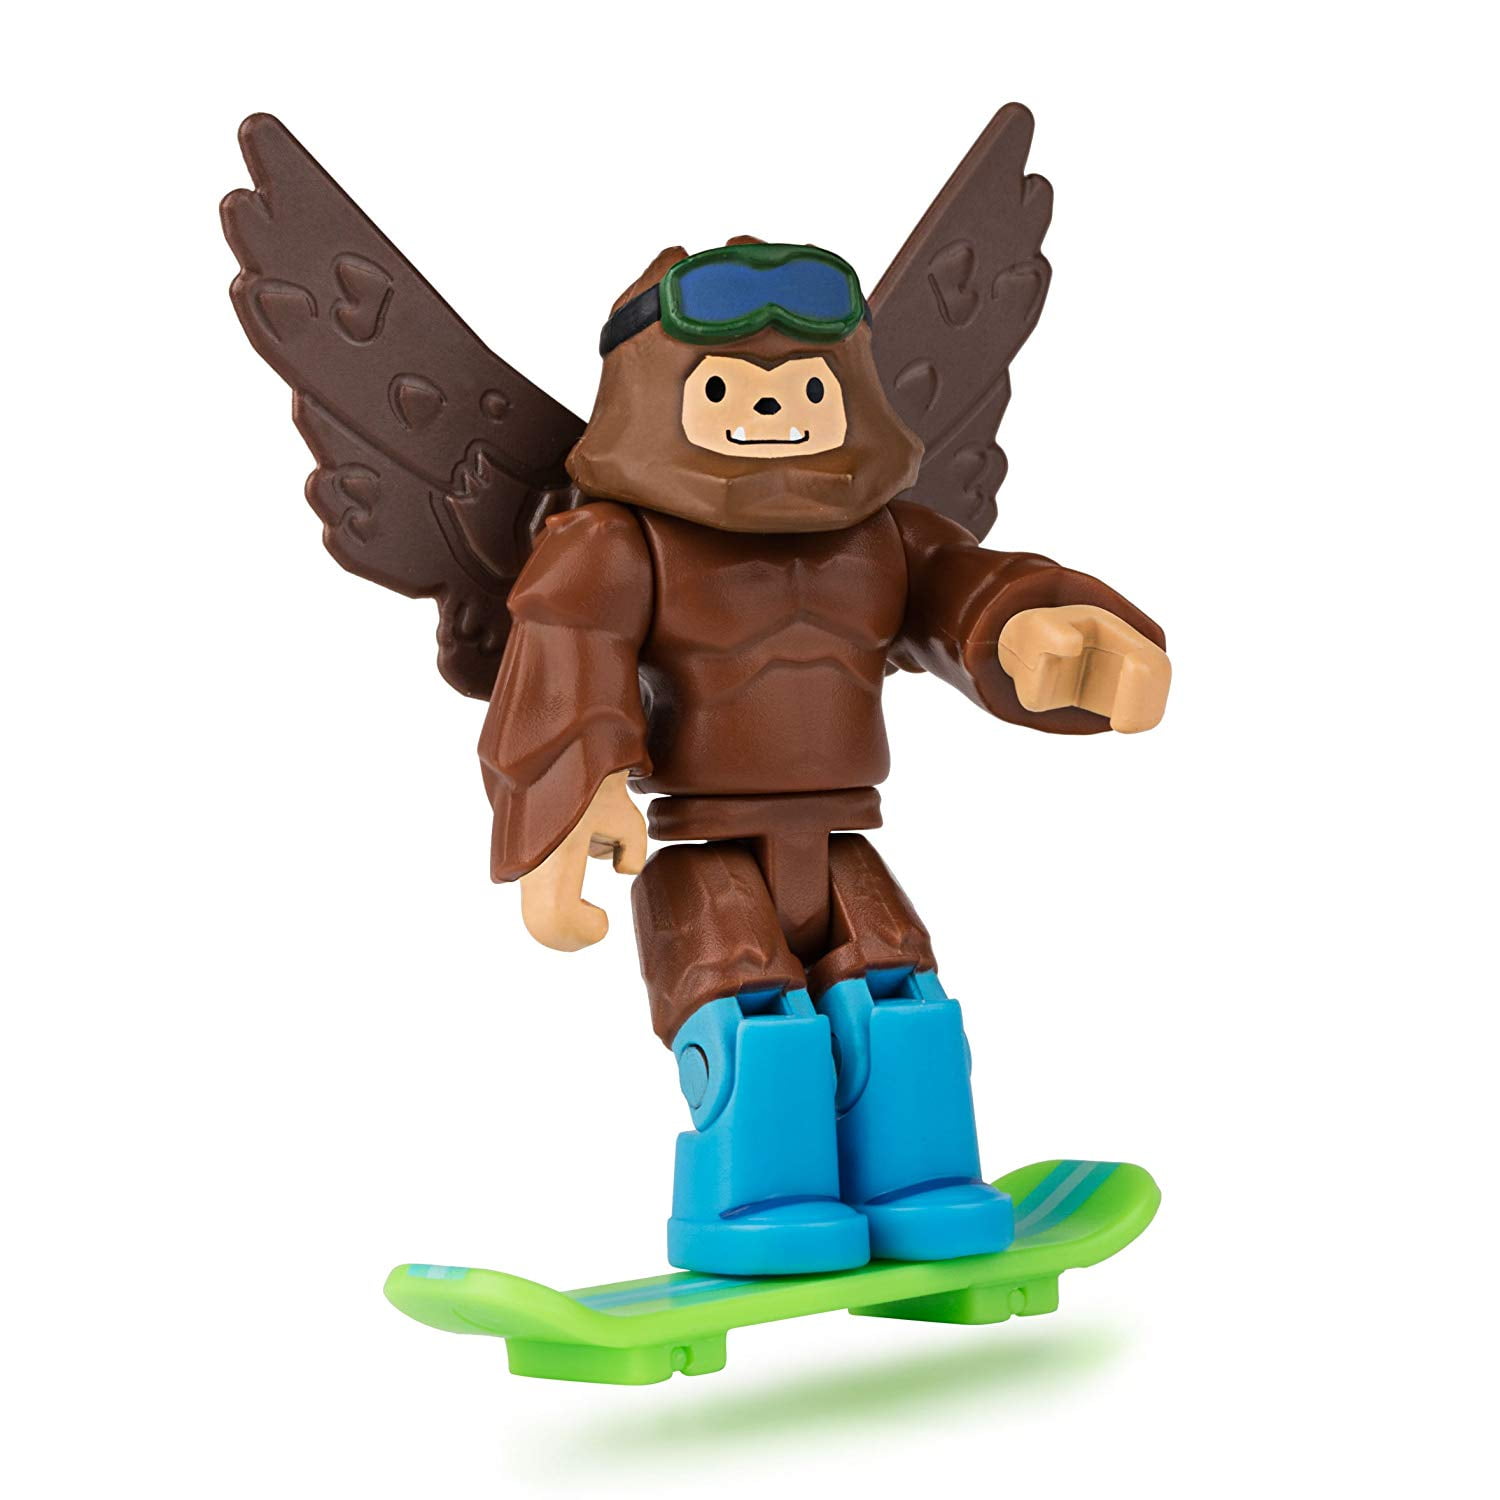 Bigfoot Boarder Airtime Figure With Exclusive Virtual Item Game Code Roblox Bigfoot Boarder Airtime Figure Packwalmartes With One Figure By - action figures roblox bigfoot boarder airtime mini figure